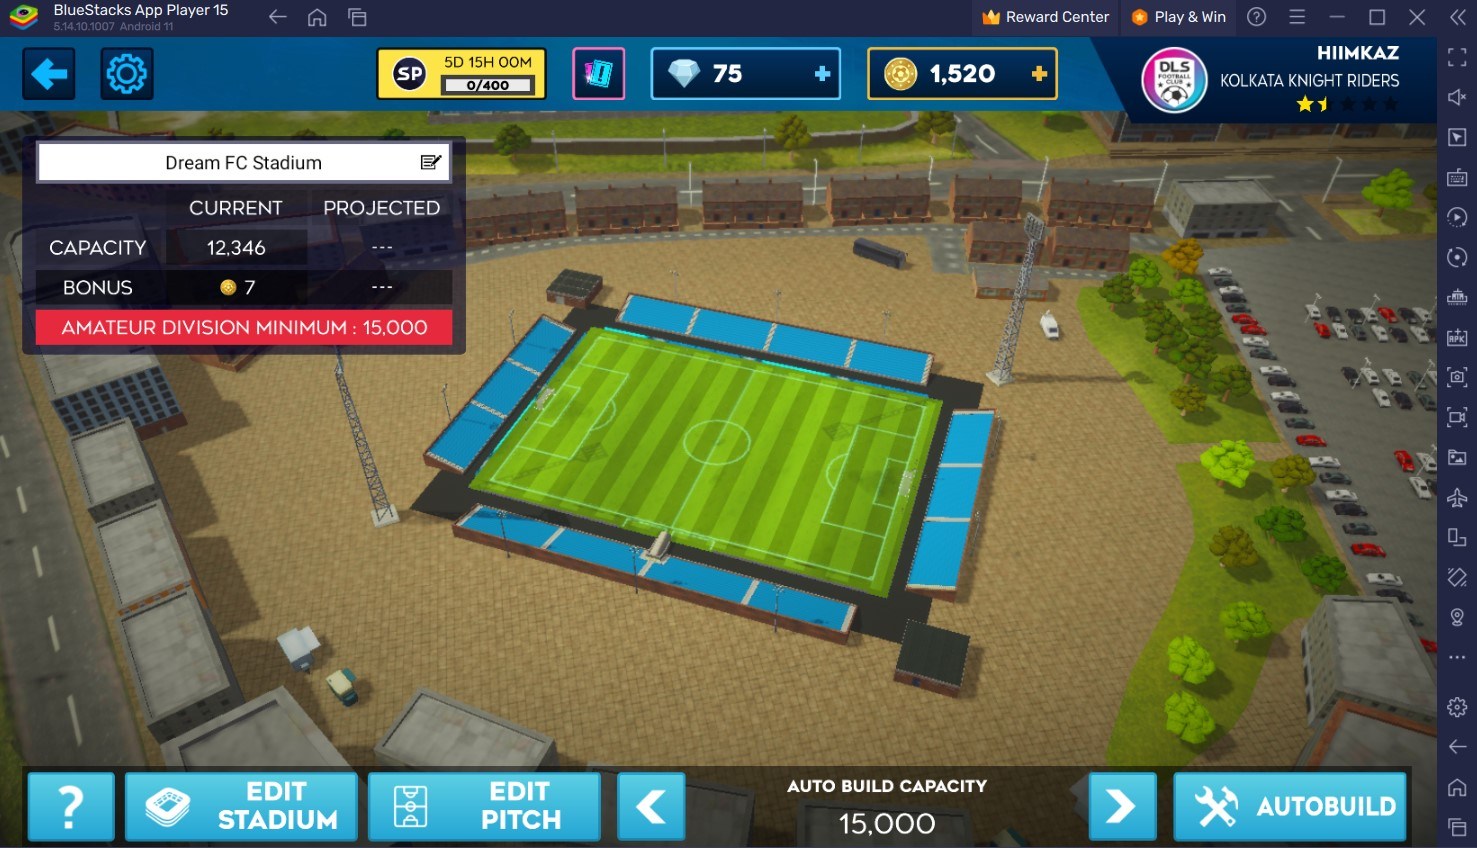 Dream League Soccer 2020 Android Gameplay #2 